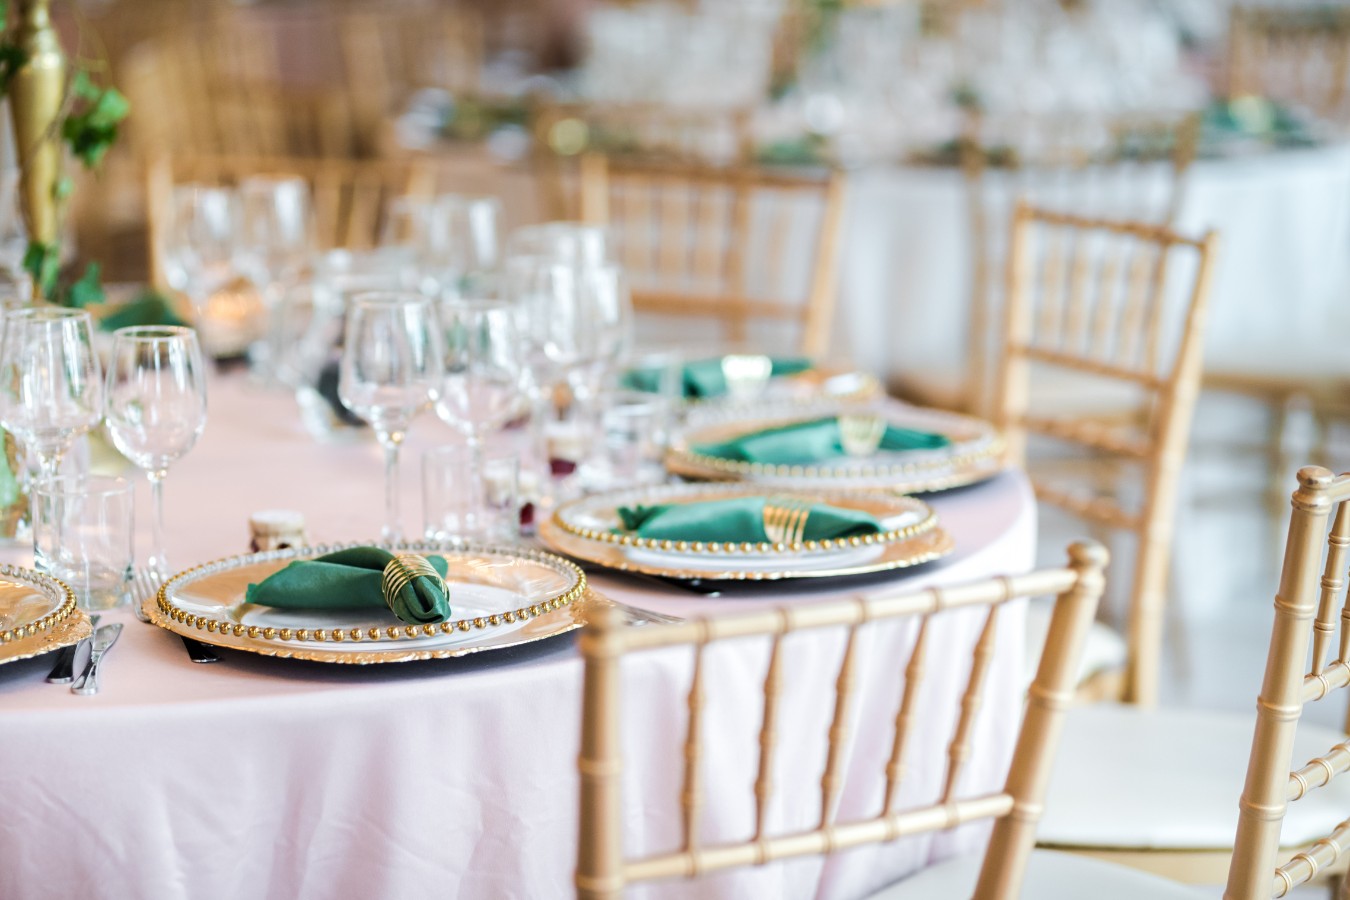 5 Ways to Save Money on Your Next Special Event